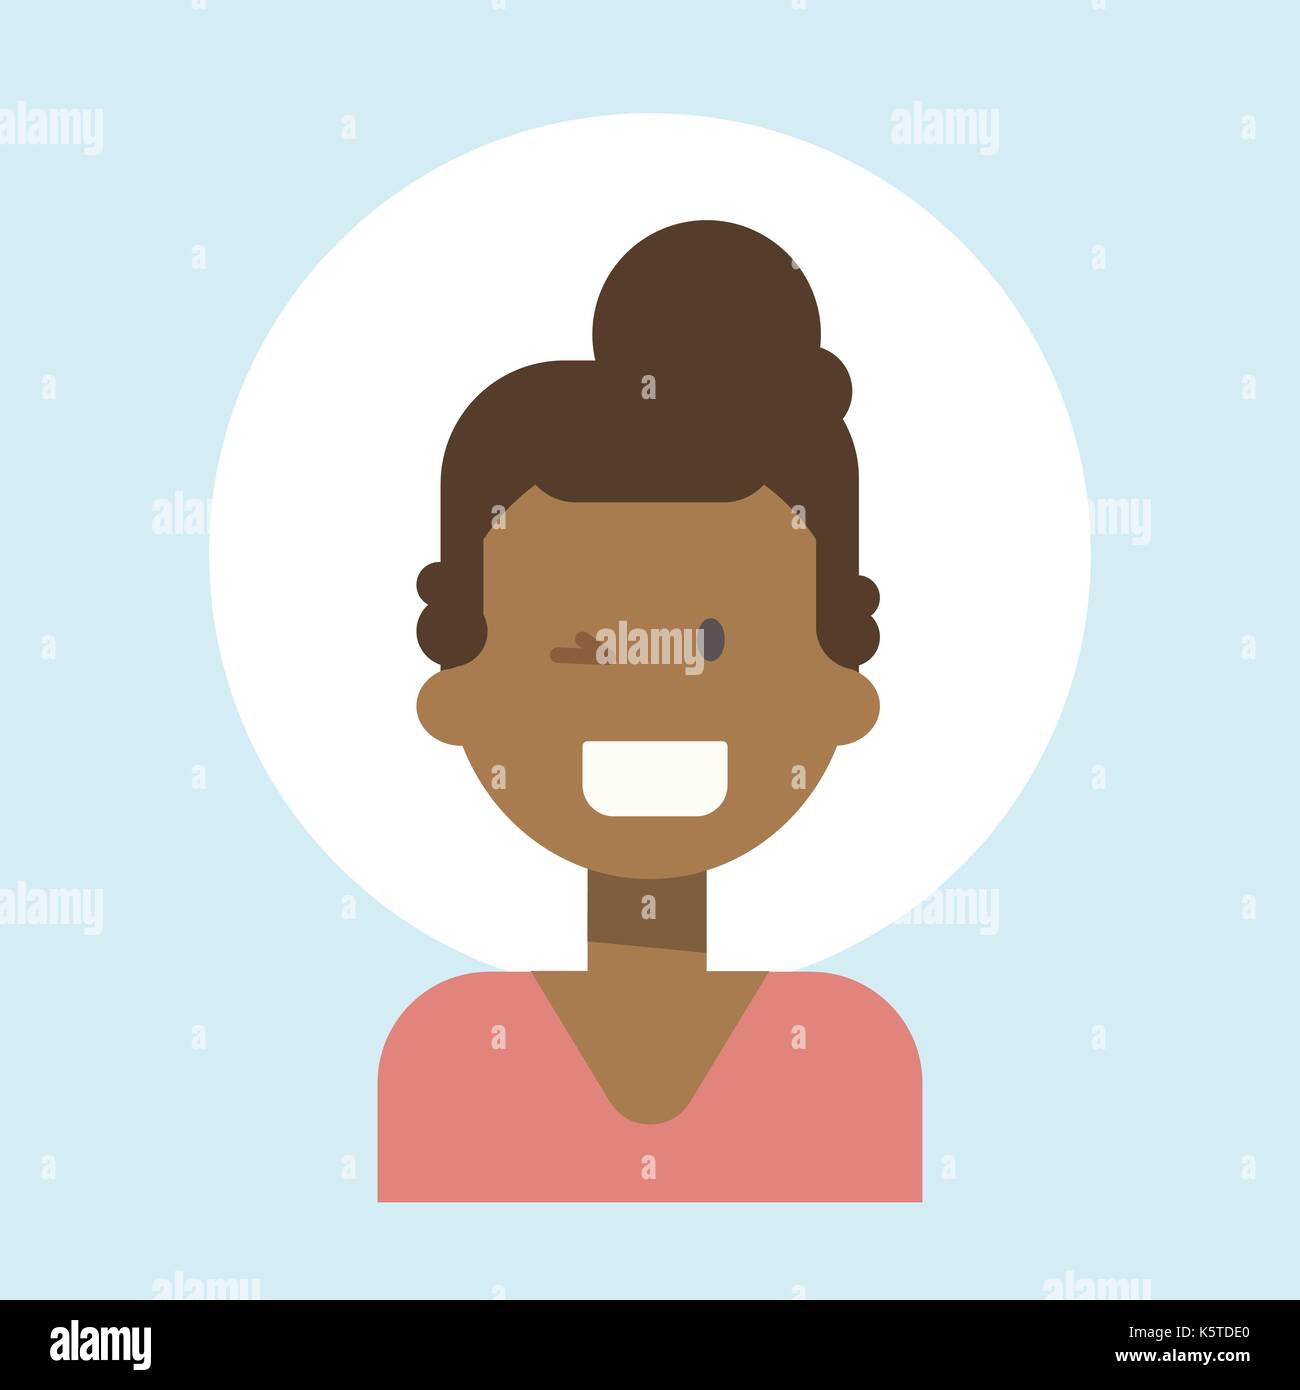 African American Female Winking Emotion Profile Icon, Woman Cartoon Portrait Happy Smiling Face Stock Vector